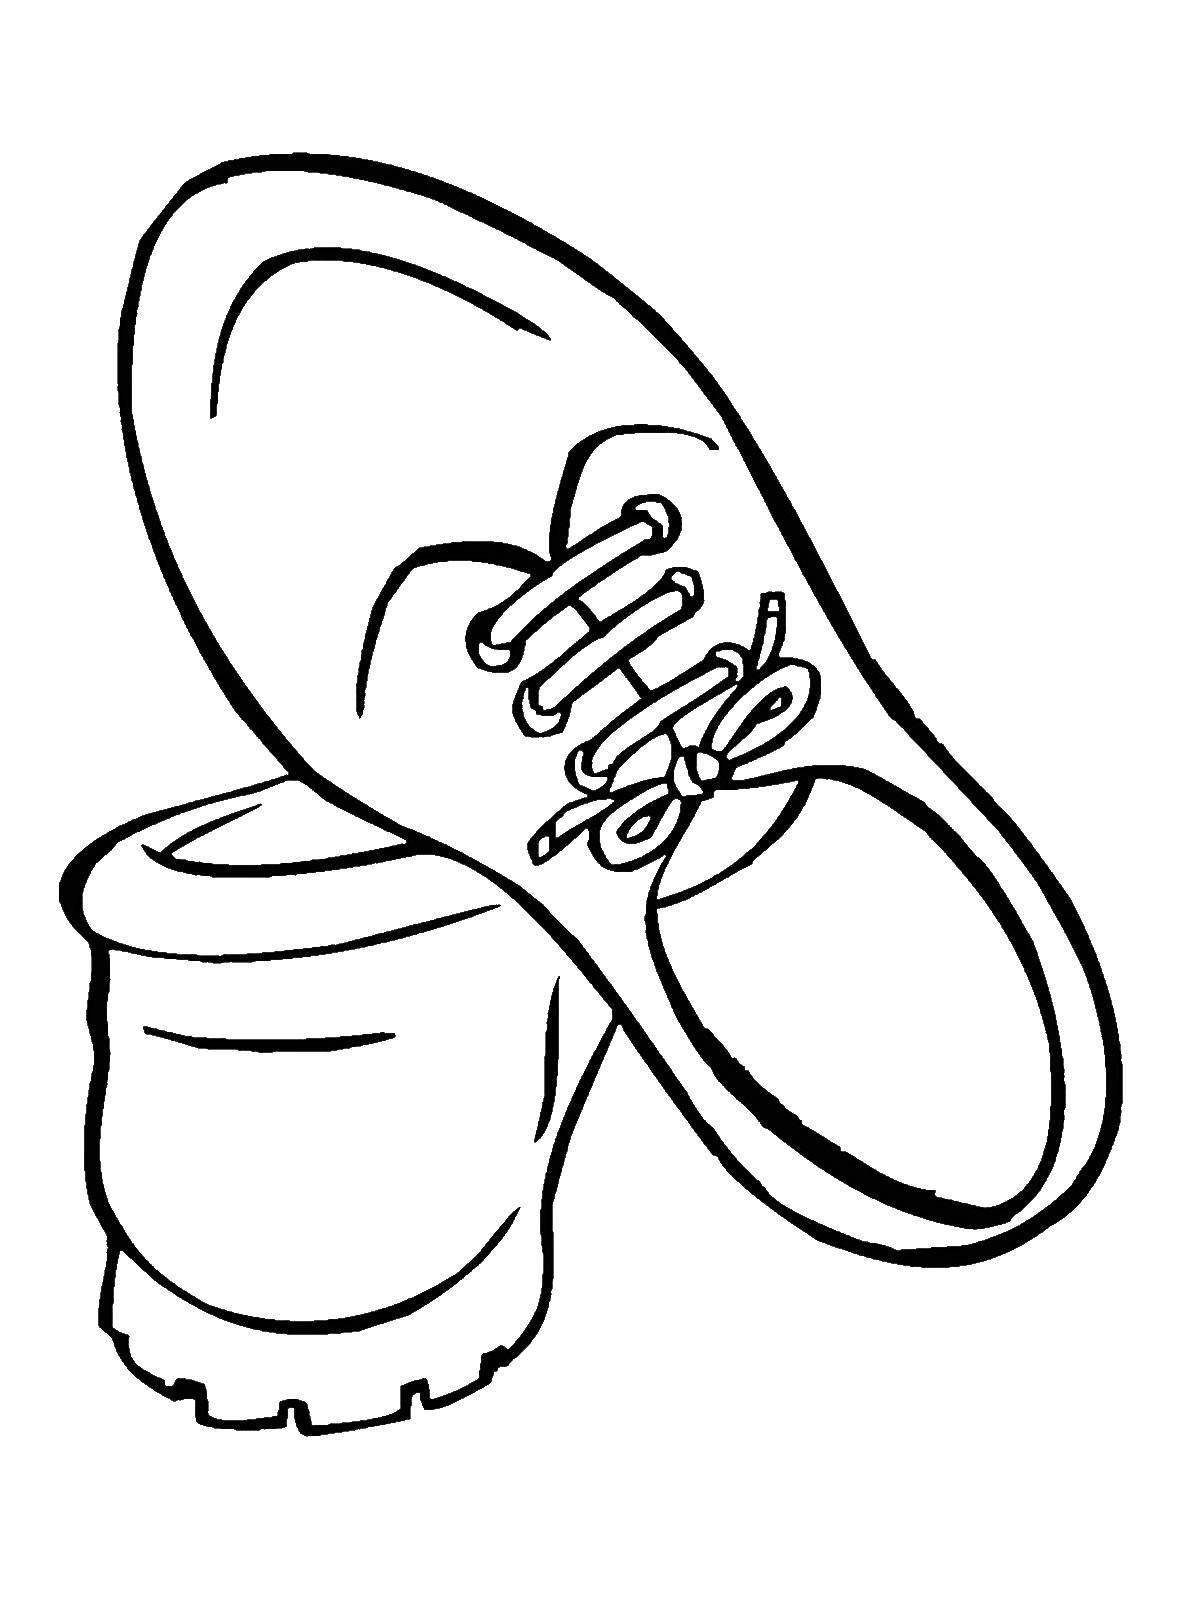 Coloring page with spectacular children's shoes